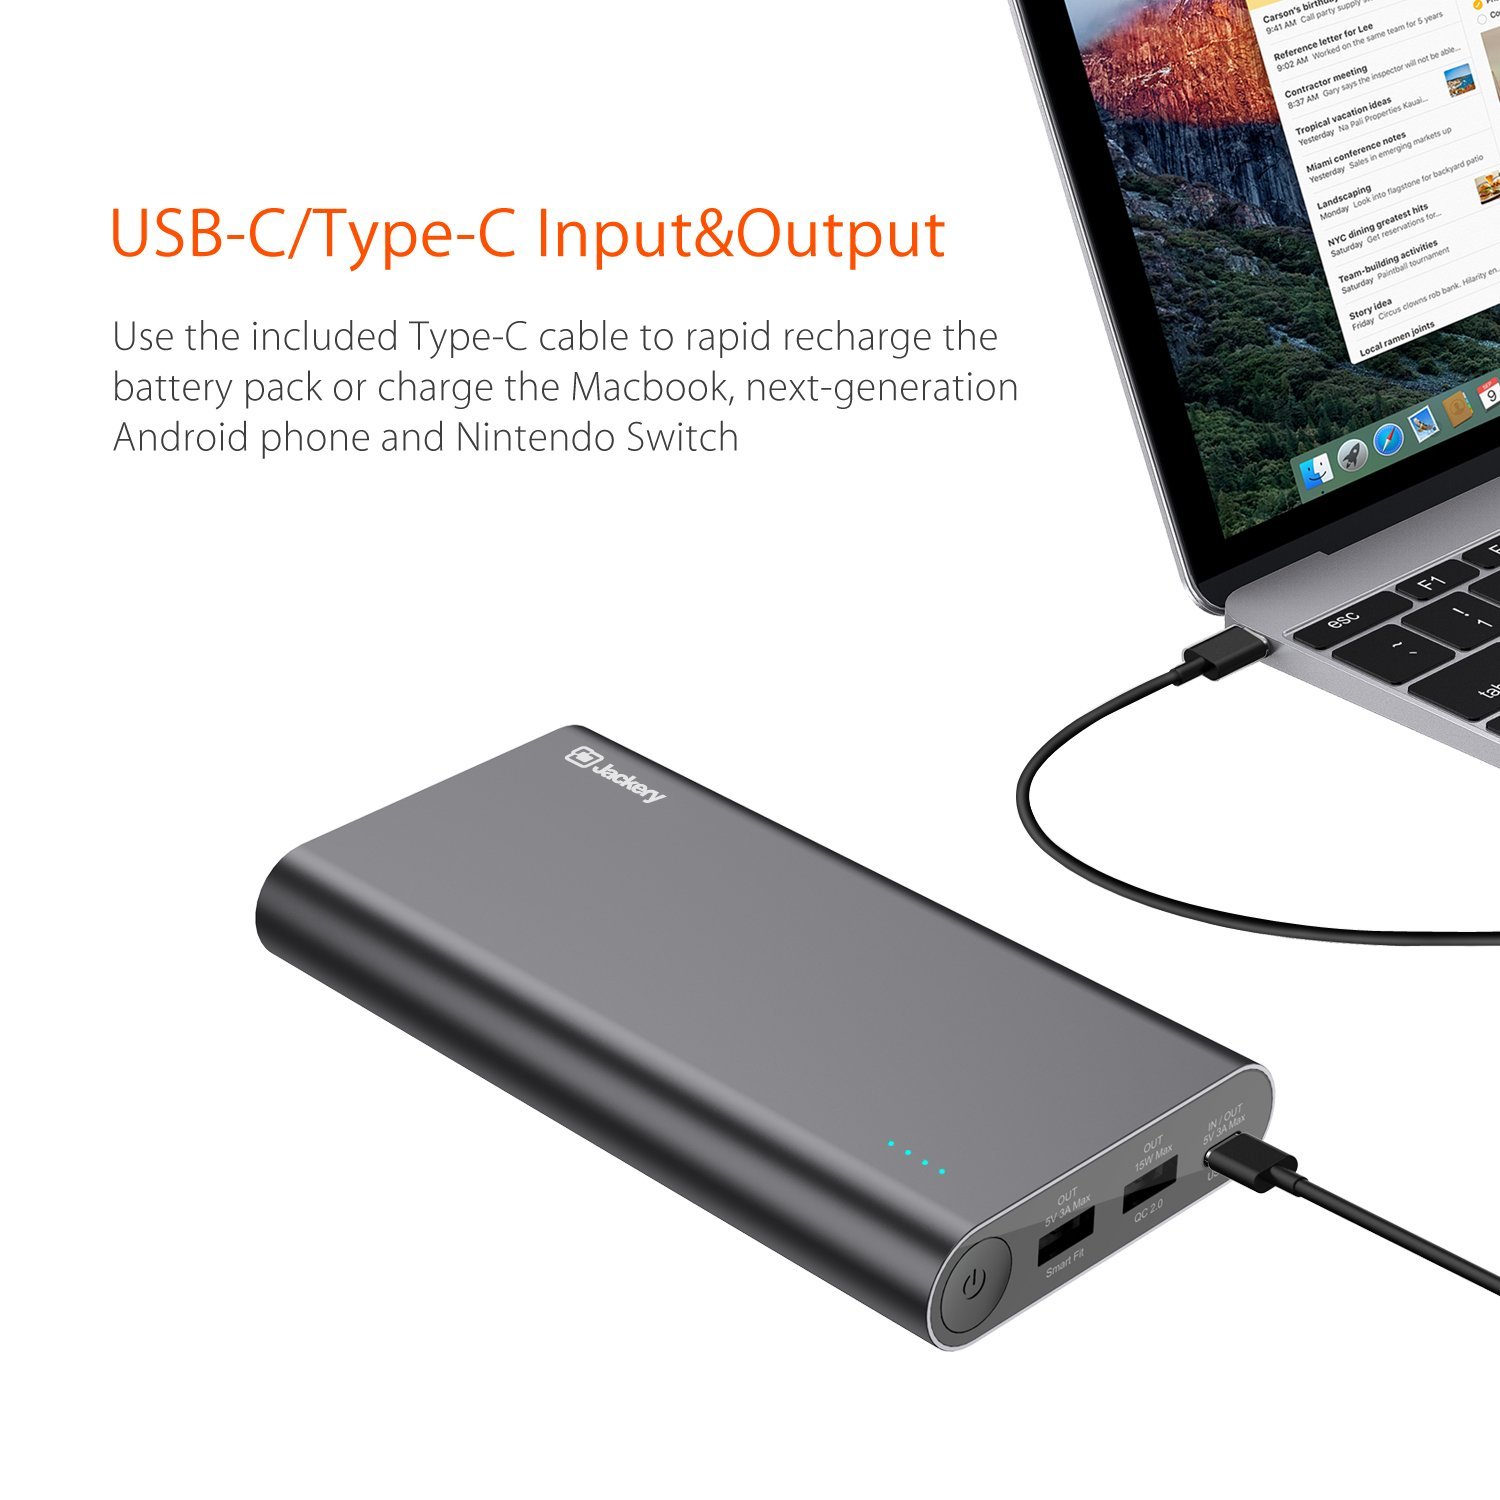 Quick Charge 3.0 In/Output, Poweradd 20100mAh Power Bank Dual USB Ports  (3.8A Output LG 18650 Battery) - CHARGE WITH POWER